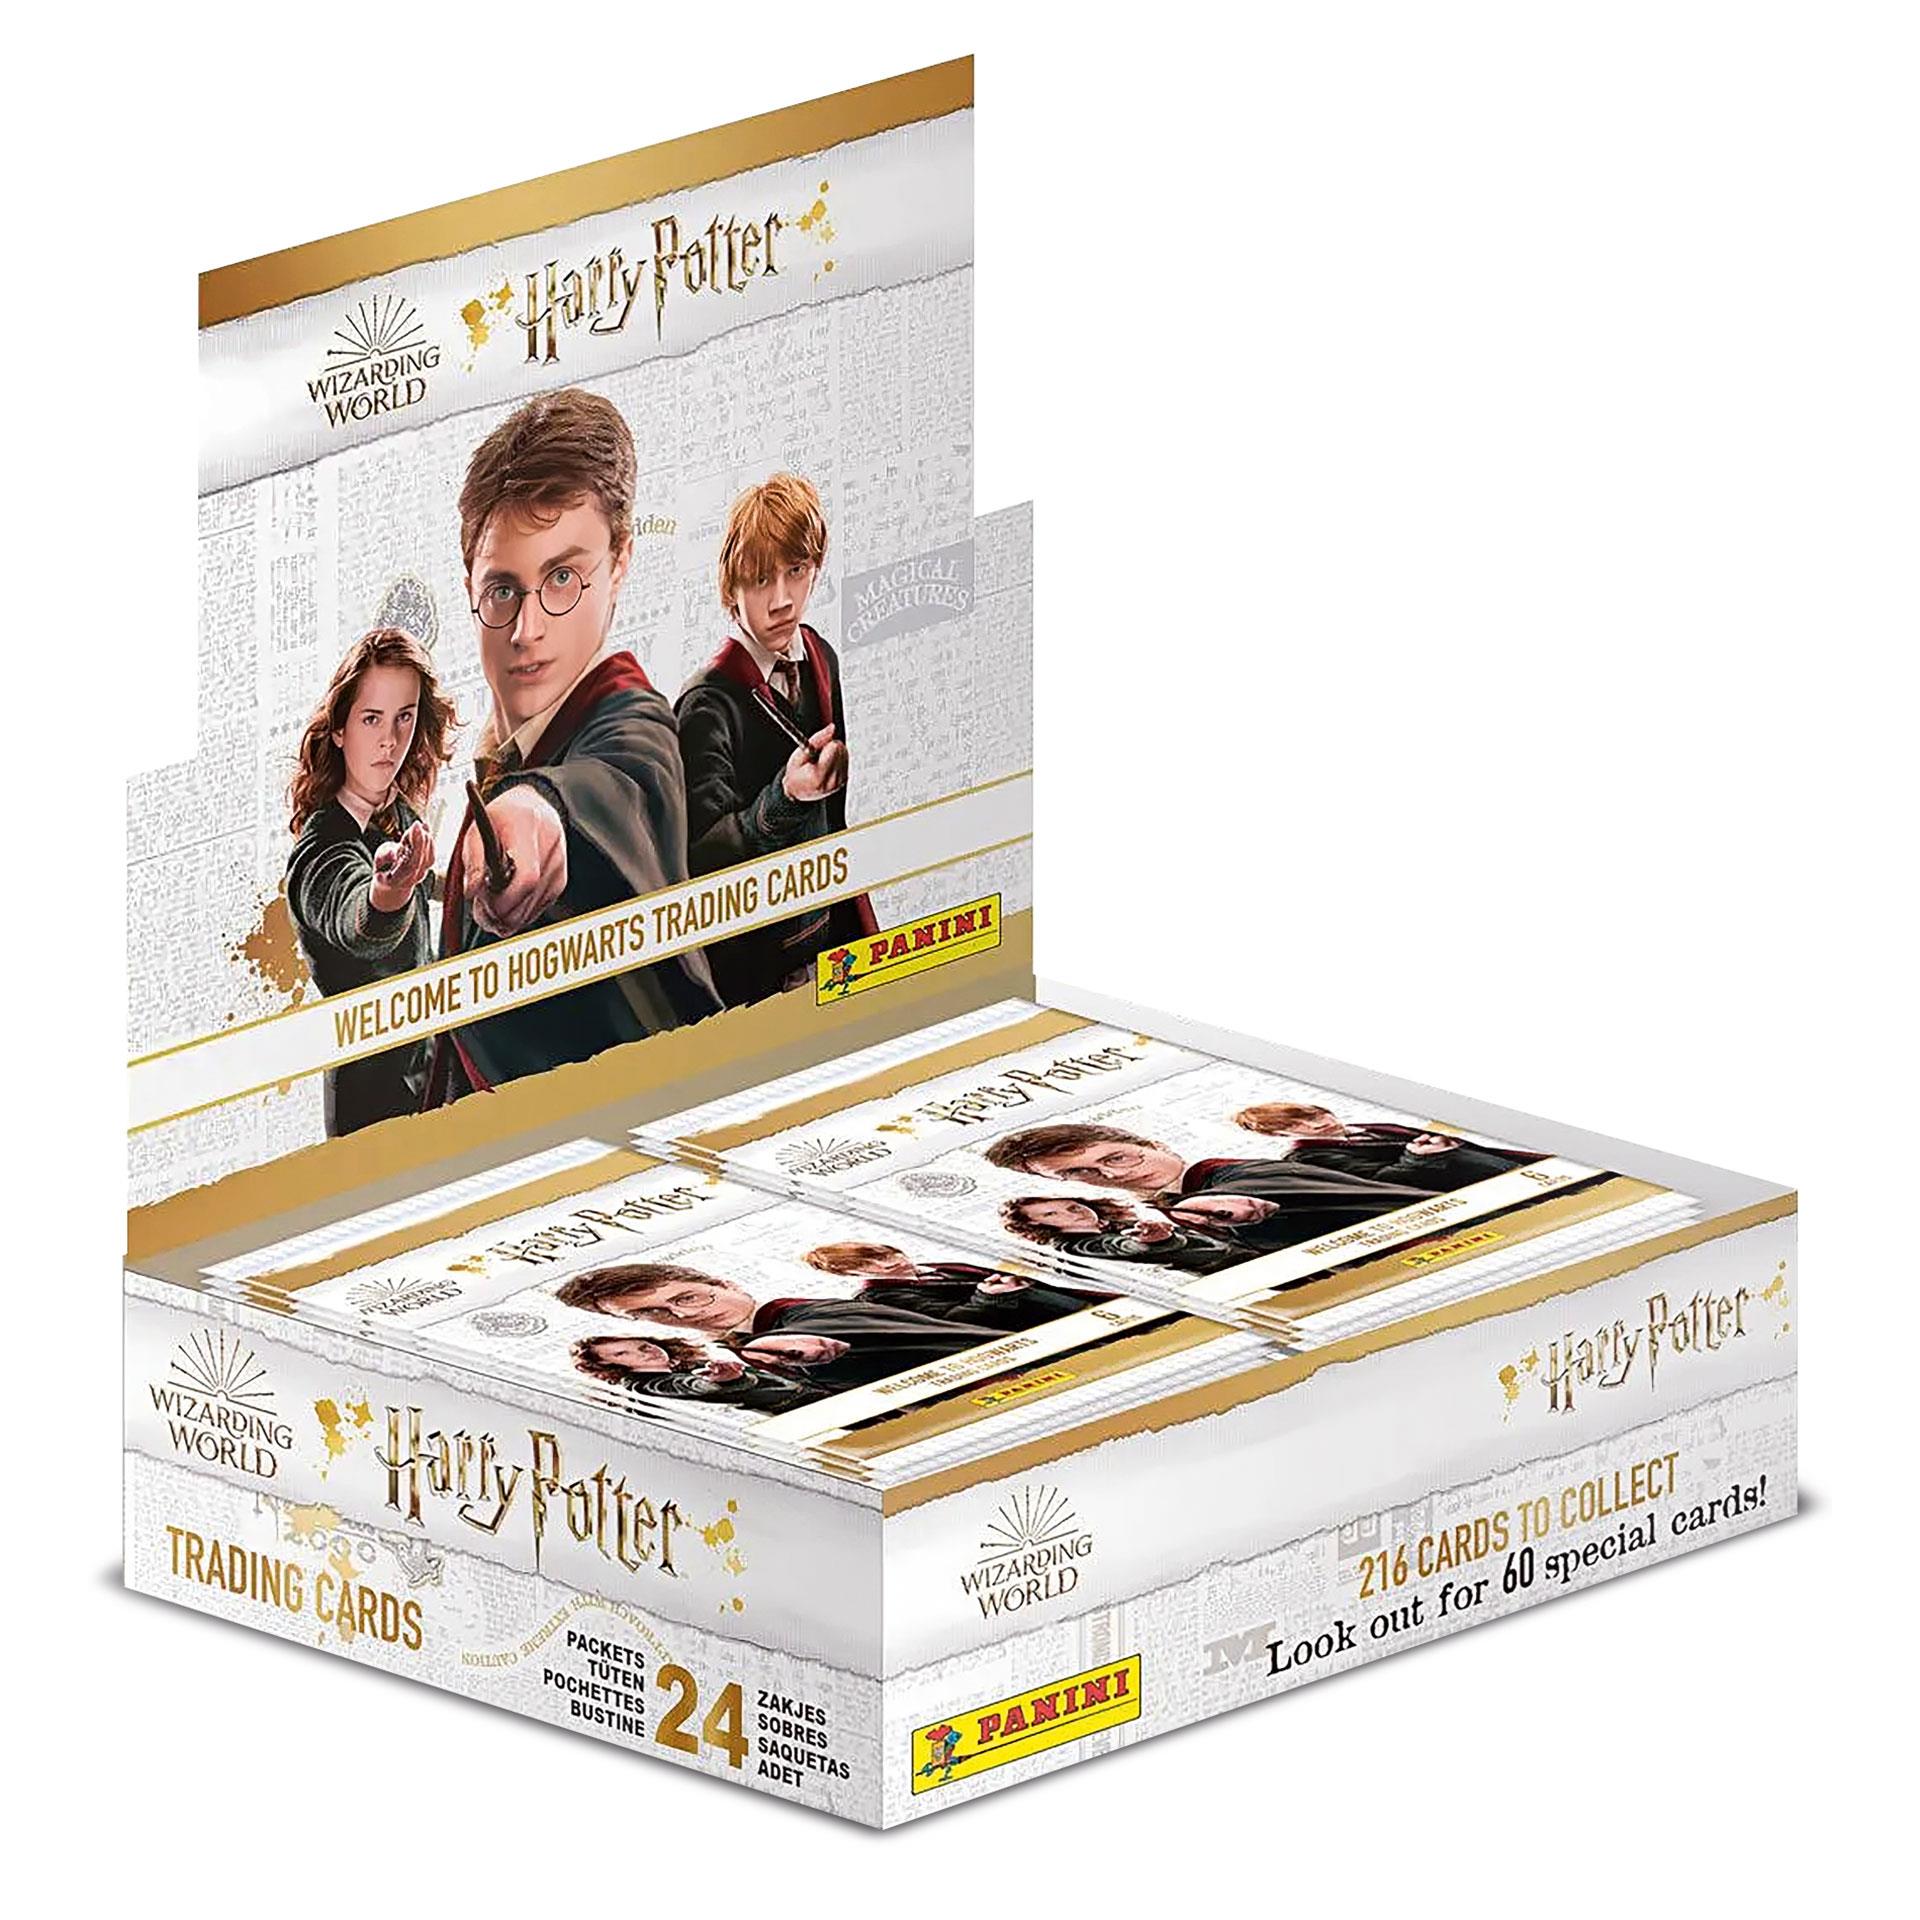 Harry Potter Welcome to Hogwarts Trading Cards Box 144 Stk.